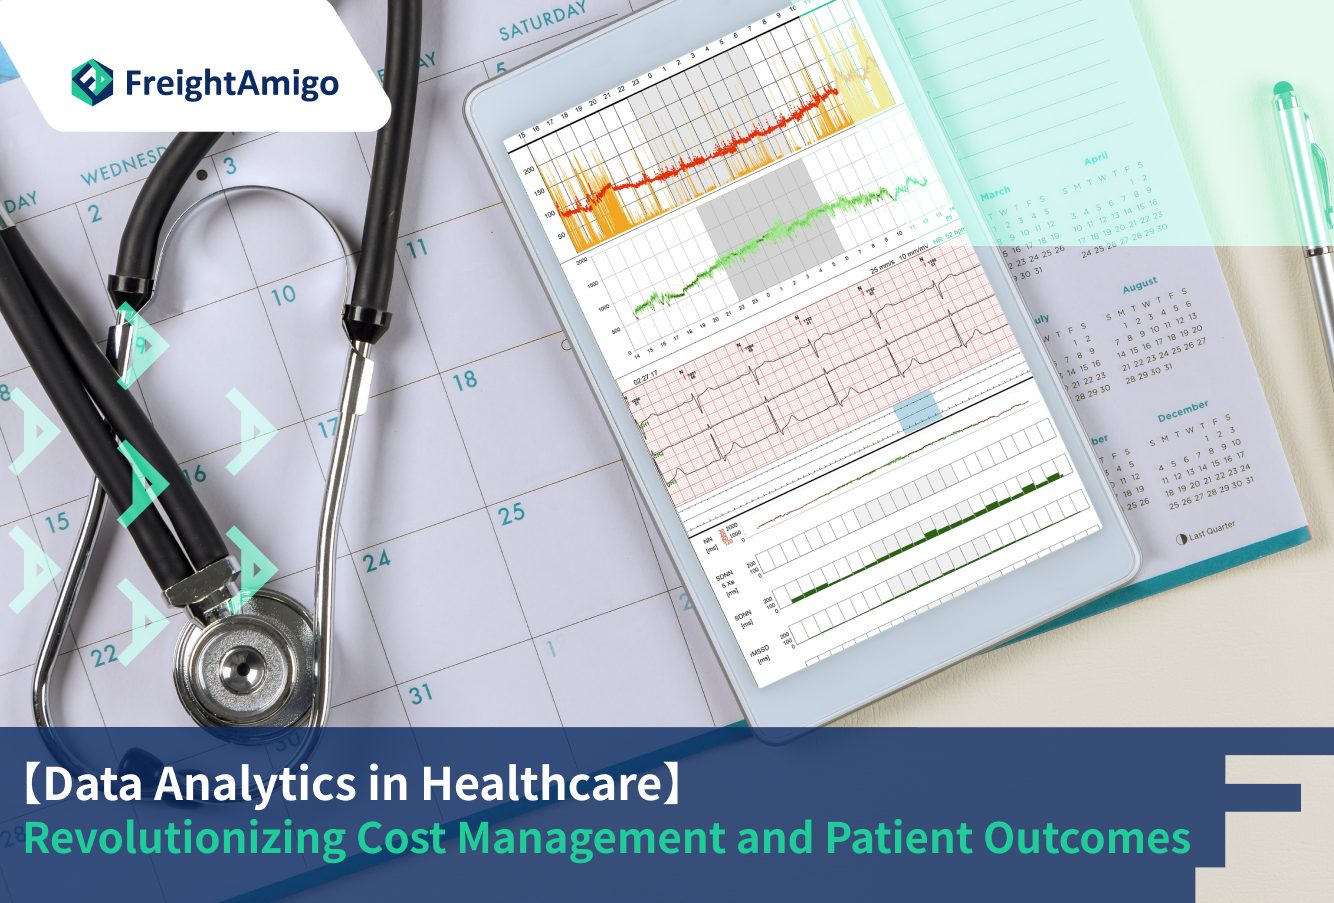 Data Analytics in Healthcare: Revolutionizing Cost Management and Patient Outcomes